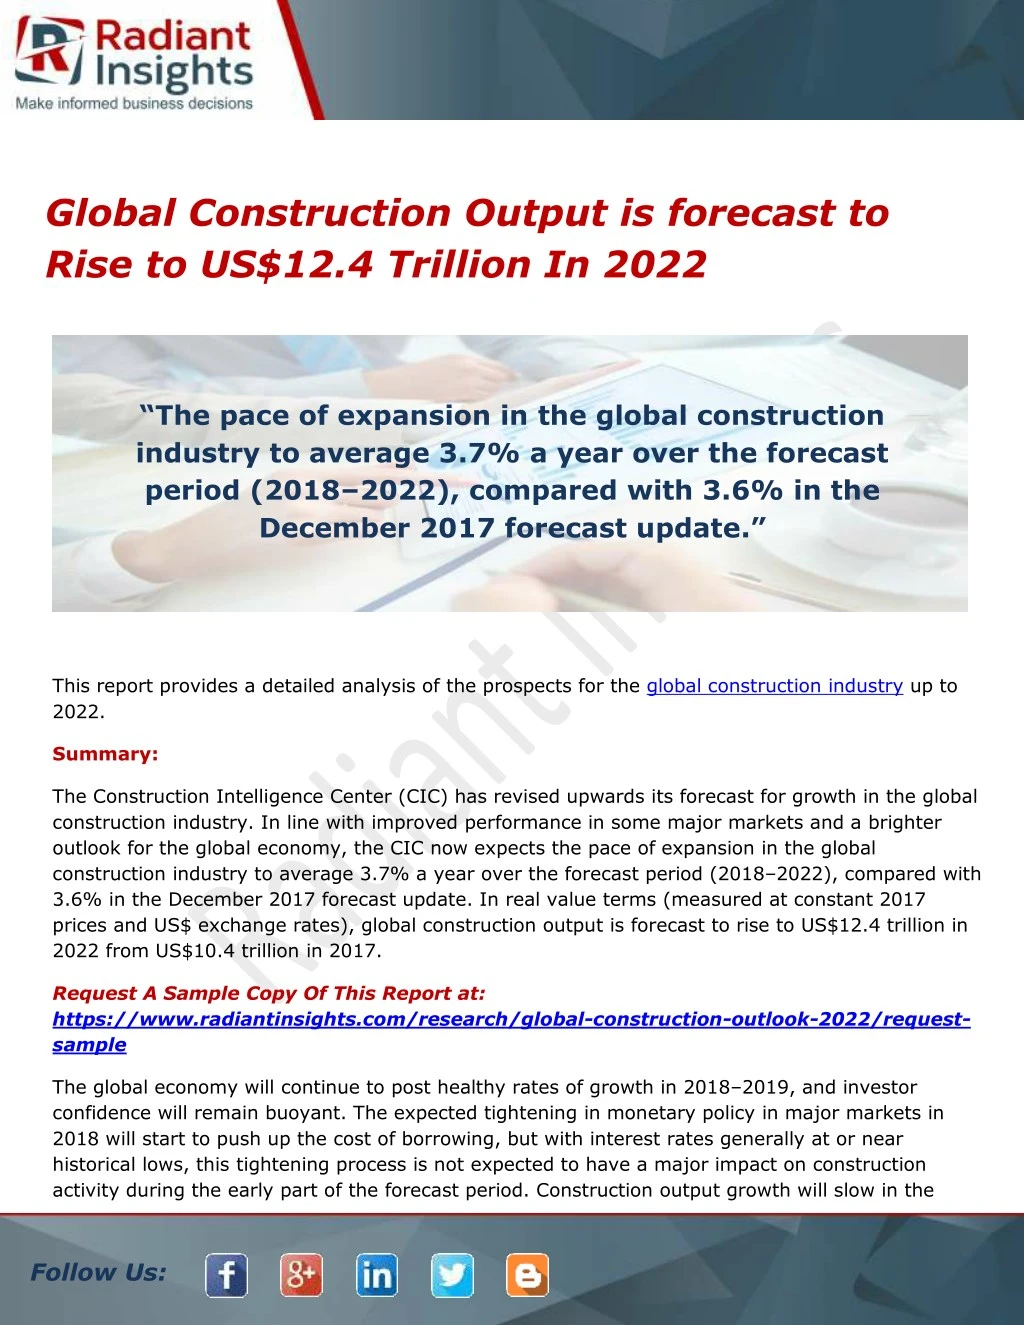 global construction output is forecast to rise